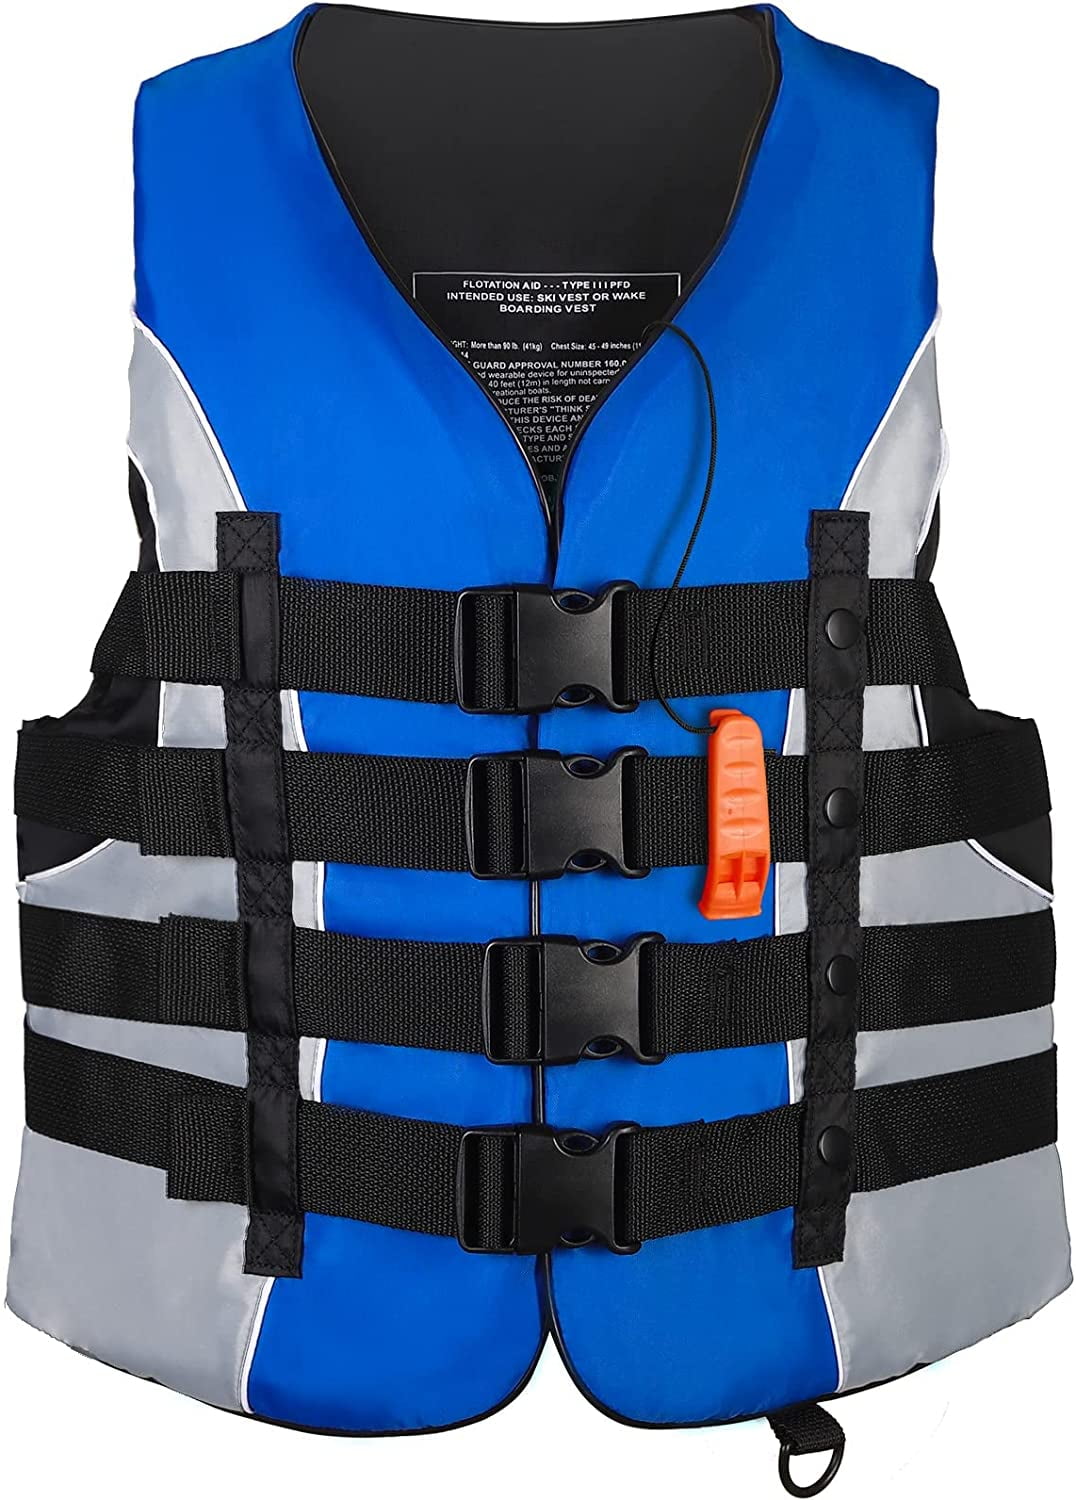 Leader Accessories Universal Life Vest For Adult USCG Approved